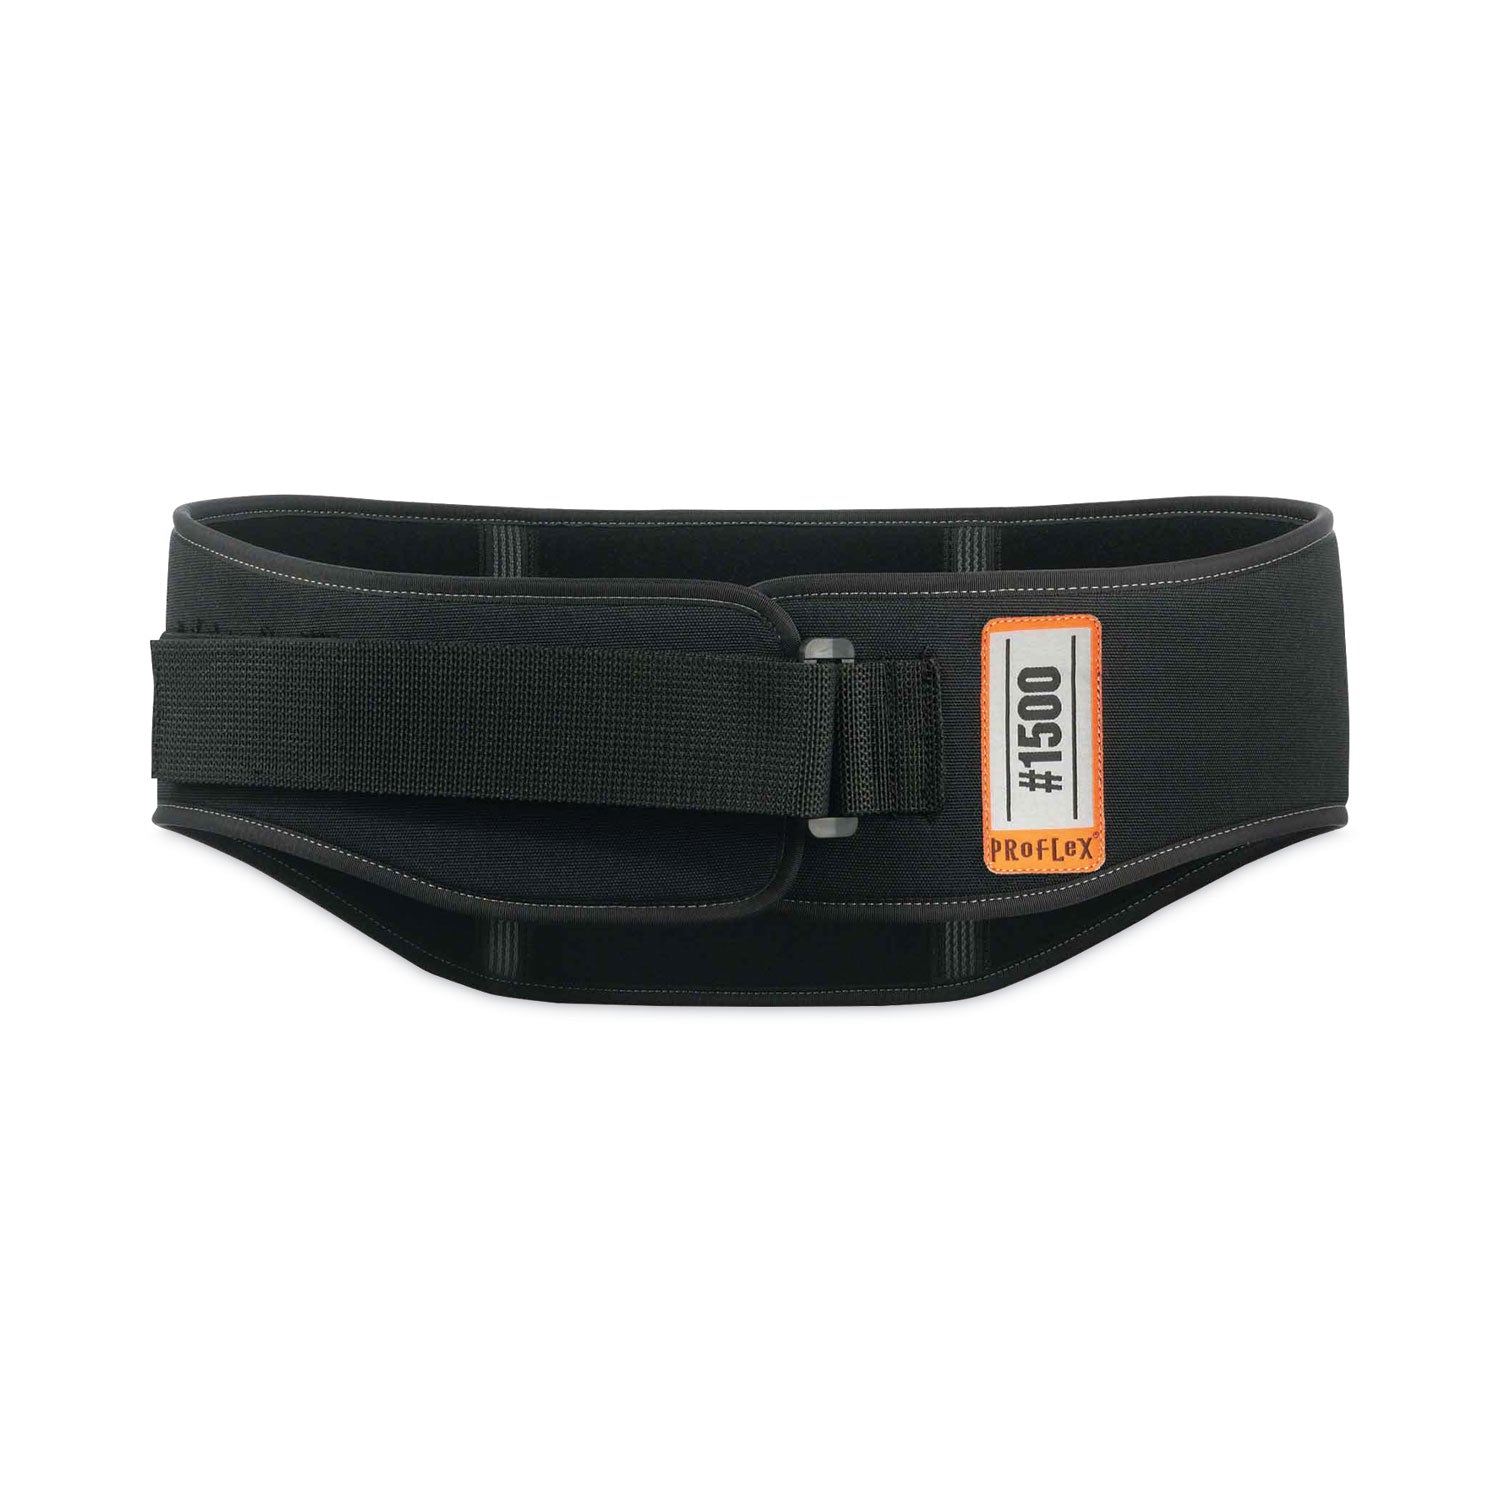 proflex-1500-weight-lifters-style-back-support-belt-x-large-38-to-42-waist-black-ships-in-1-3-business-days_ego11474 - 1